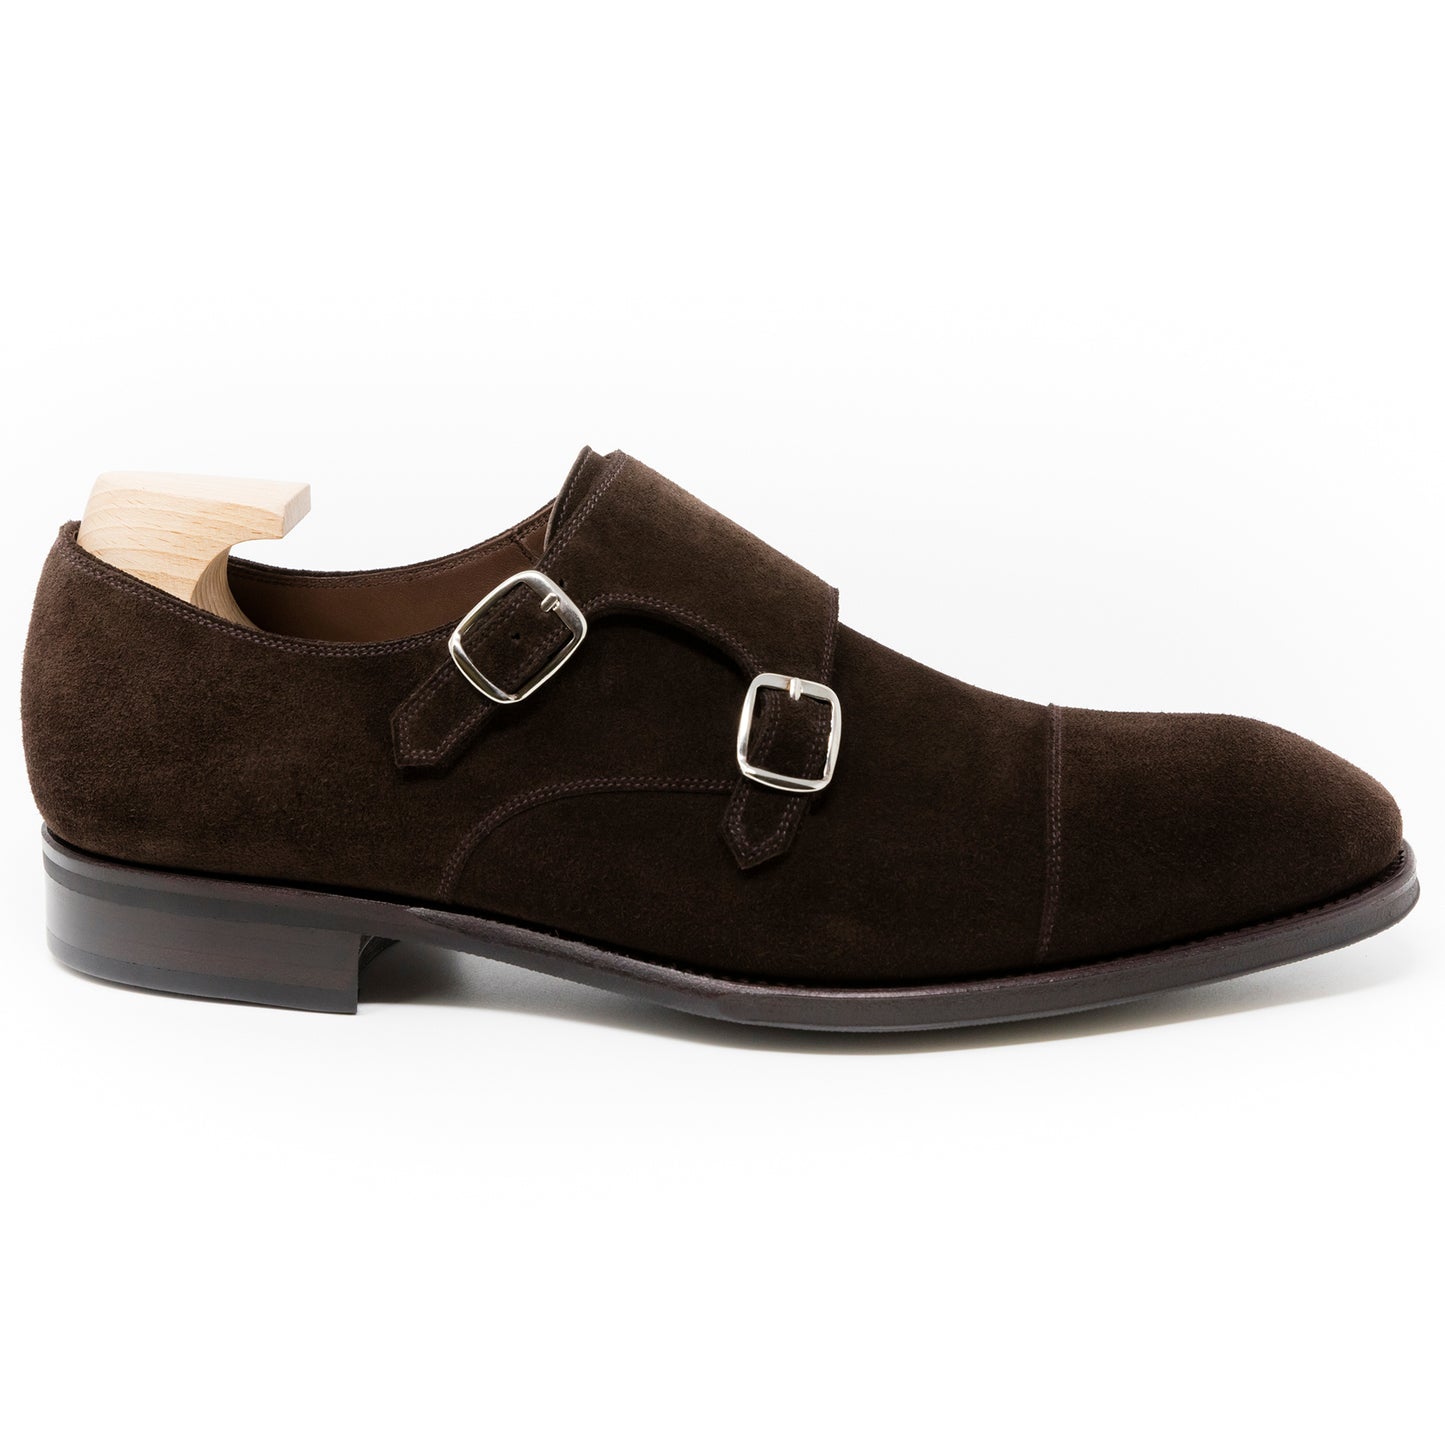 TLB Mallorca leather shoes 506 / ALAN / SUEDE BROWN